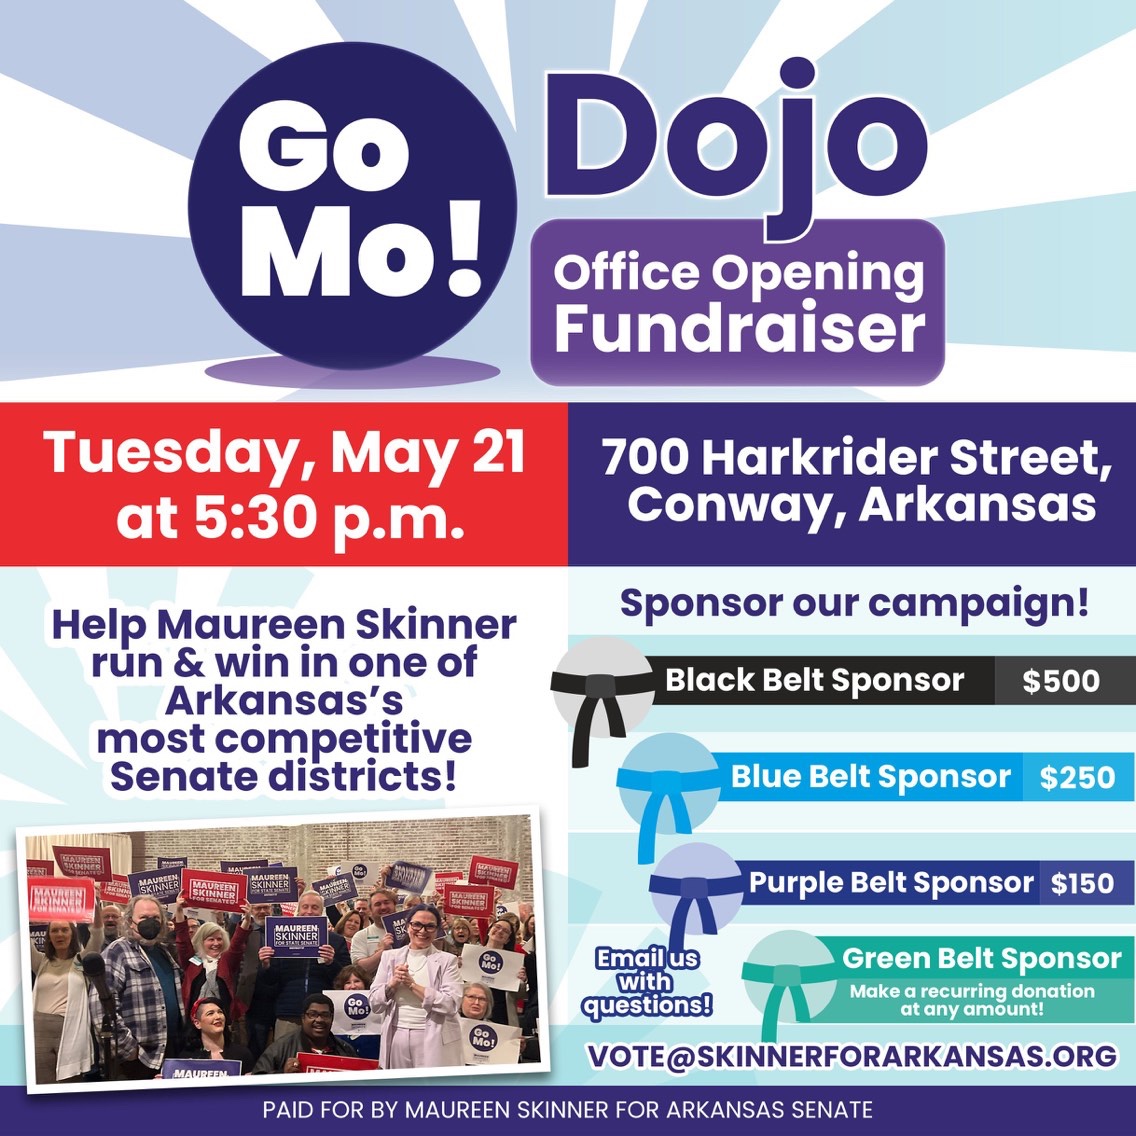 TODAY!! See Maureen Skinner’s new digs! We mean DOJO! Go to 700 Harkrider Street in Conway! Be there! #runworkgivevote